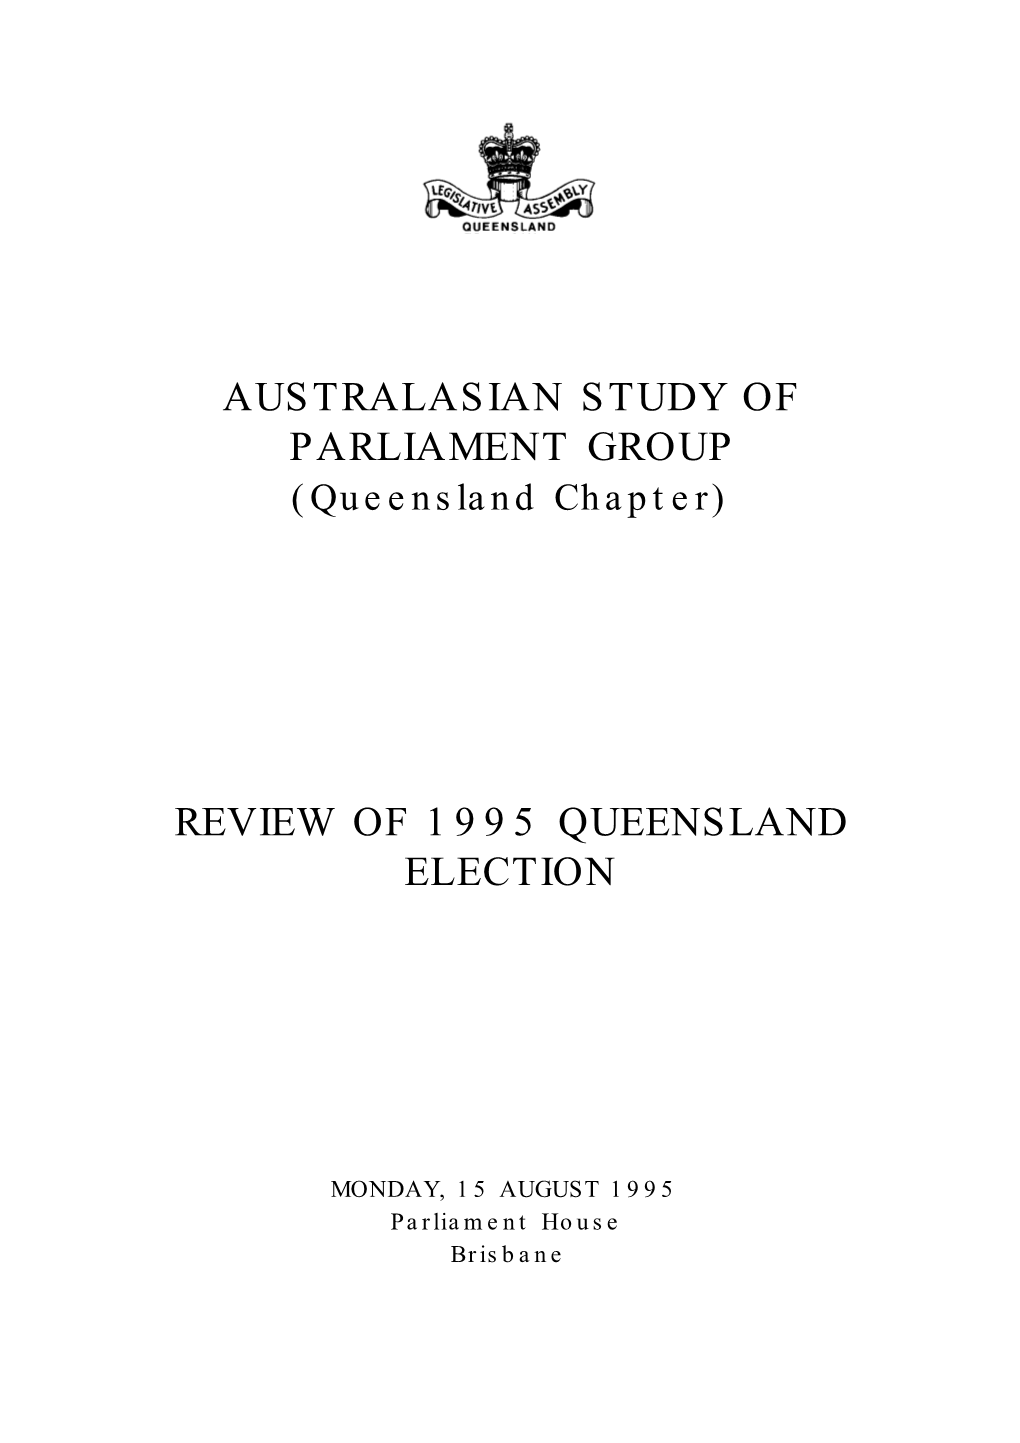 Review of 1995 Queensland Election